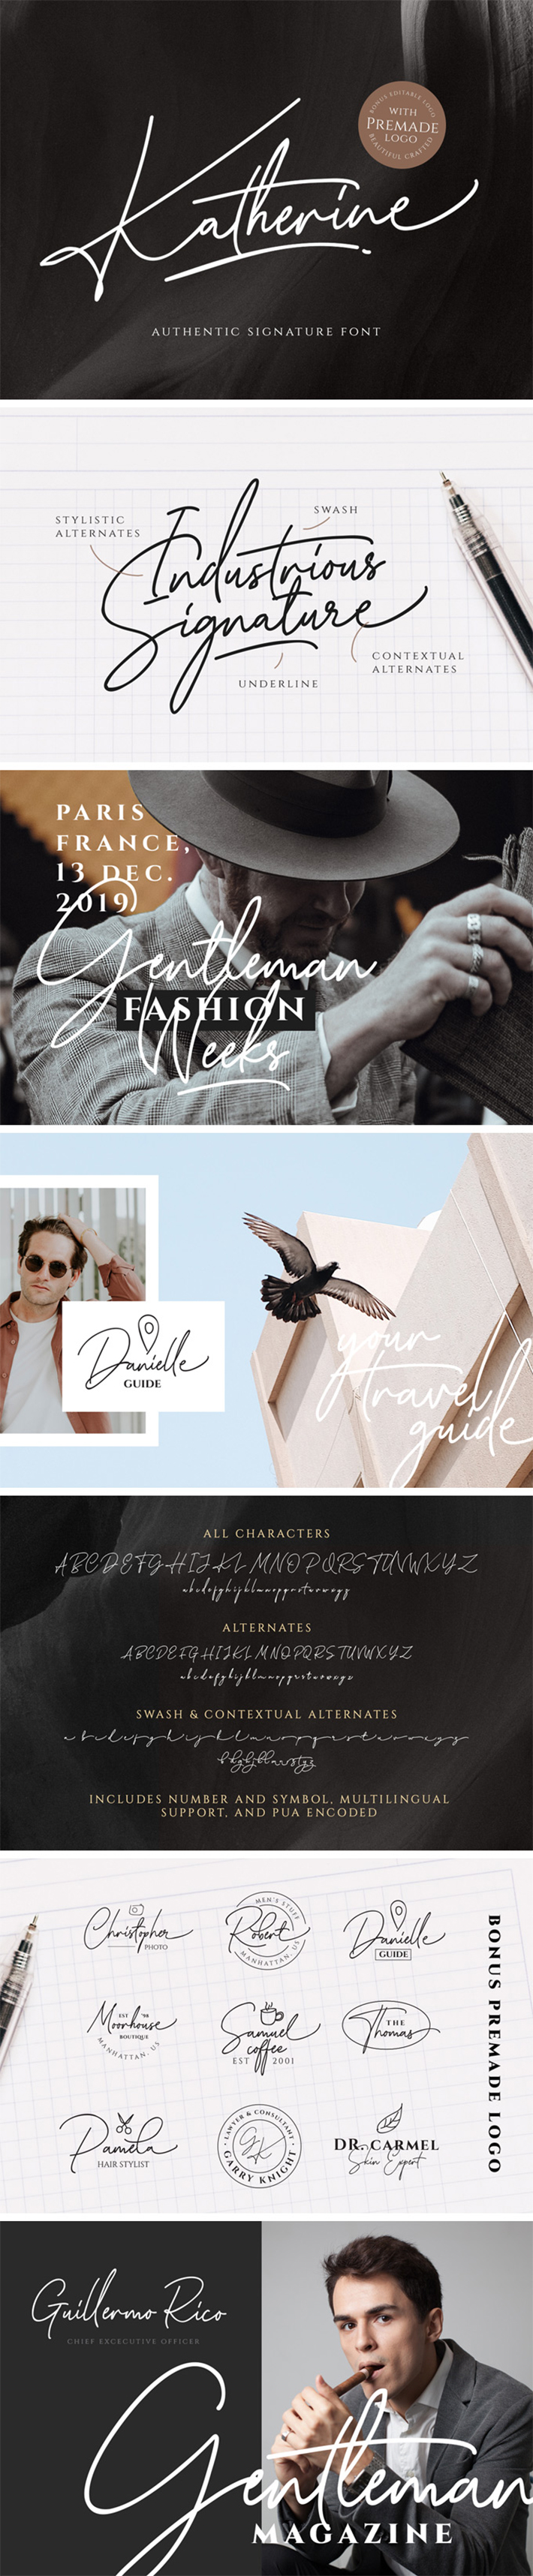 Free Download Stylish Signature Font For Designers